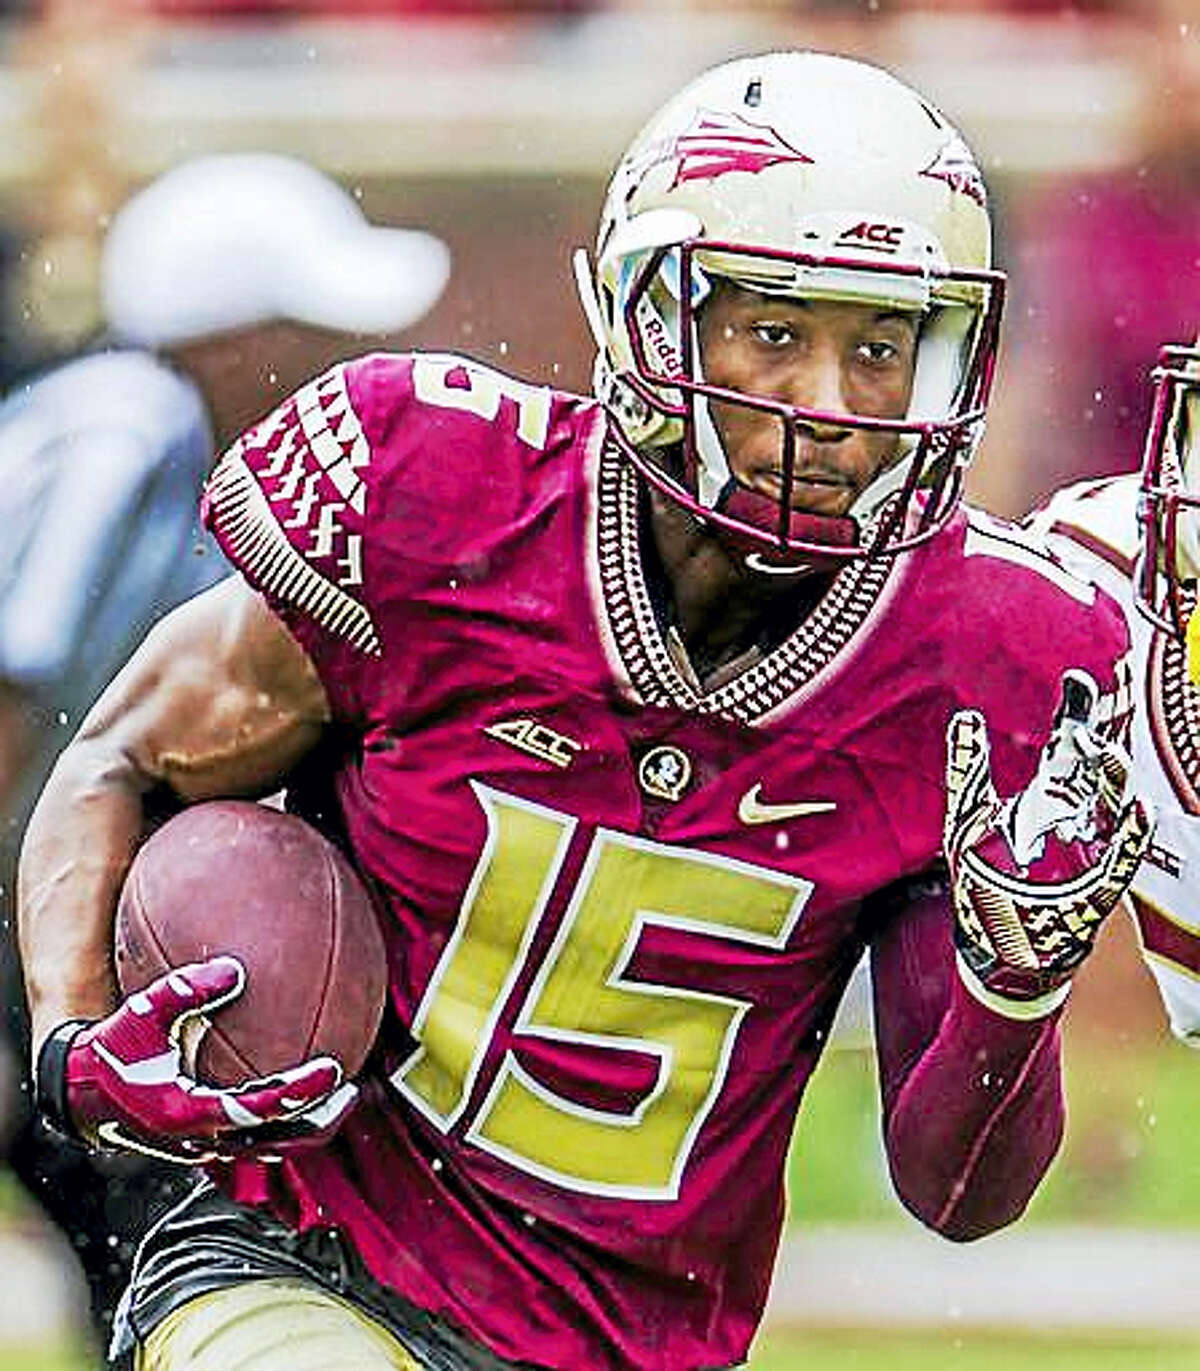 In this April 11, 2015, file photo, Florida State wide receiver Travis Rudolph run in the first half of the Florida State Garnet & Gold spring college football game in Tallahassee, Fla. A small gesture of kindness by Florida State University wide receiver Travis Rudolph — captured in a photo and shared on Facebook — had tears streaming down the face of the sixth-grader’s mother, Leah Paske. “I’m not sure what exactly made this incredibly kind man share a lunch table with my son, but I’m happy to say it will not soon be forgotten,” she wrote.